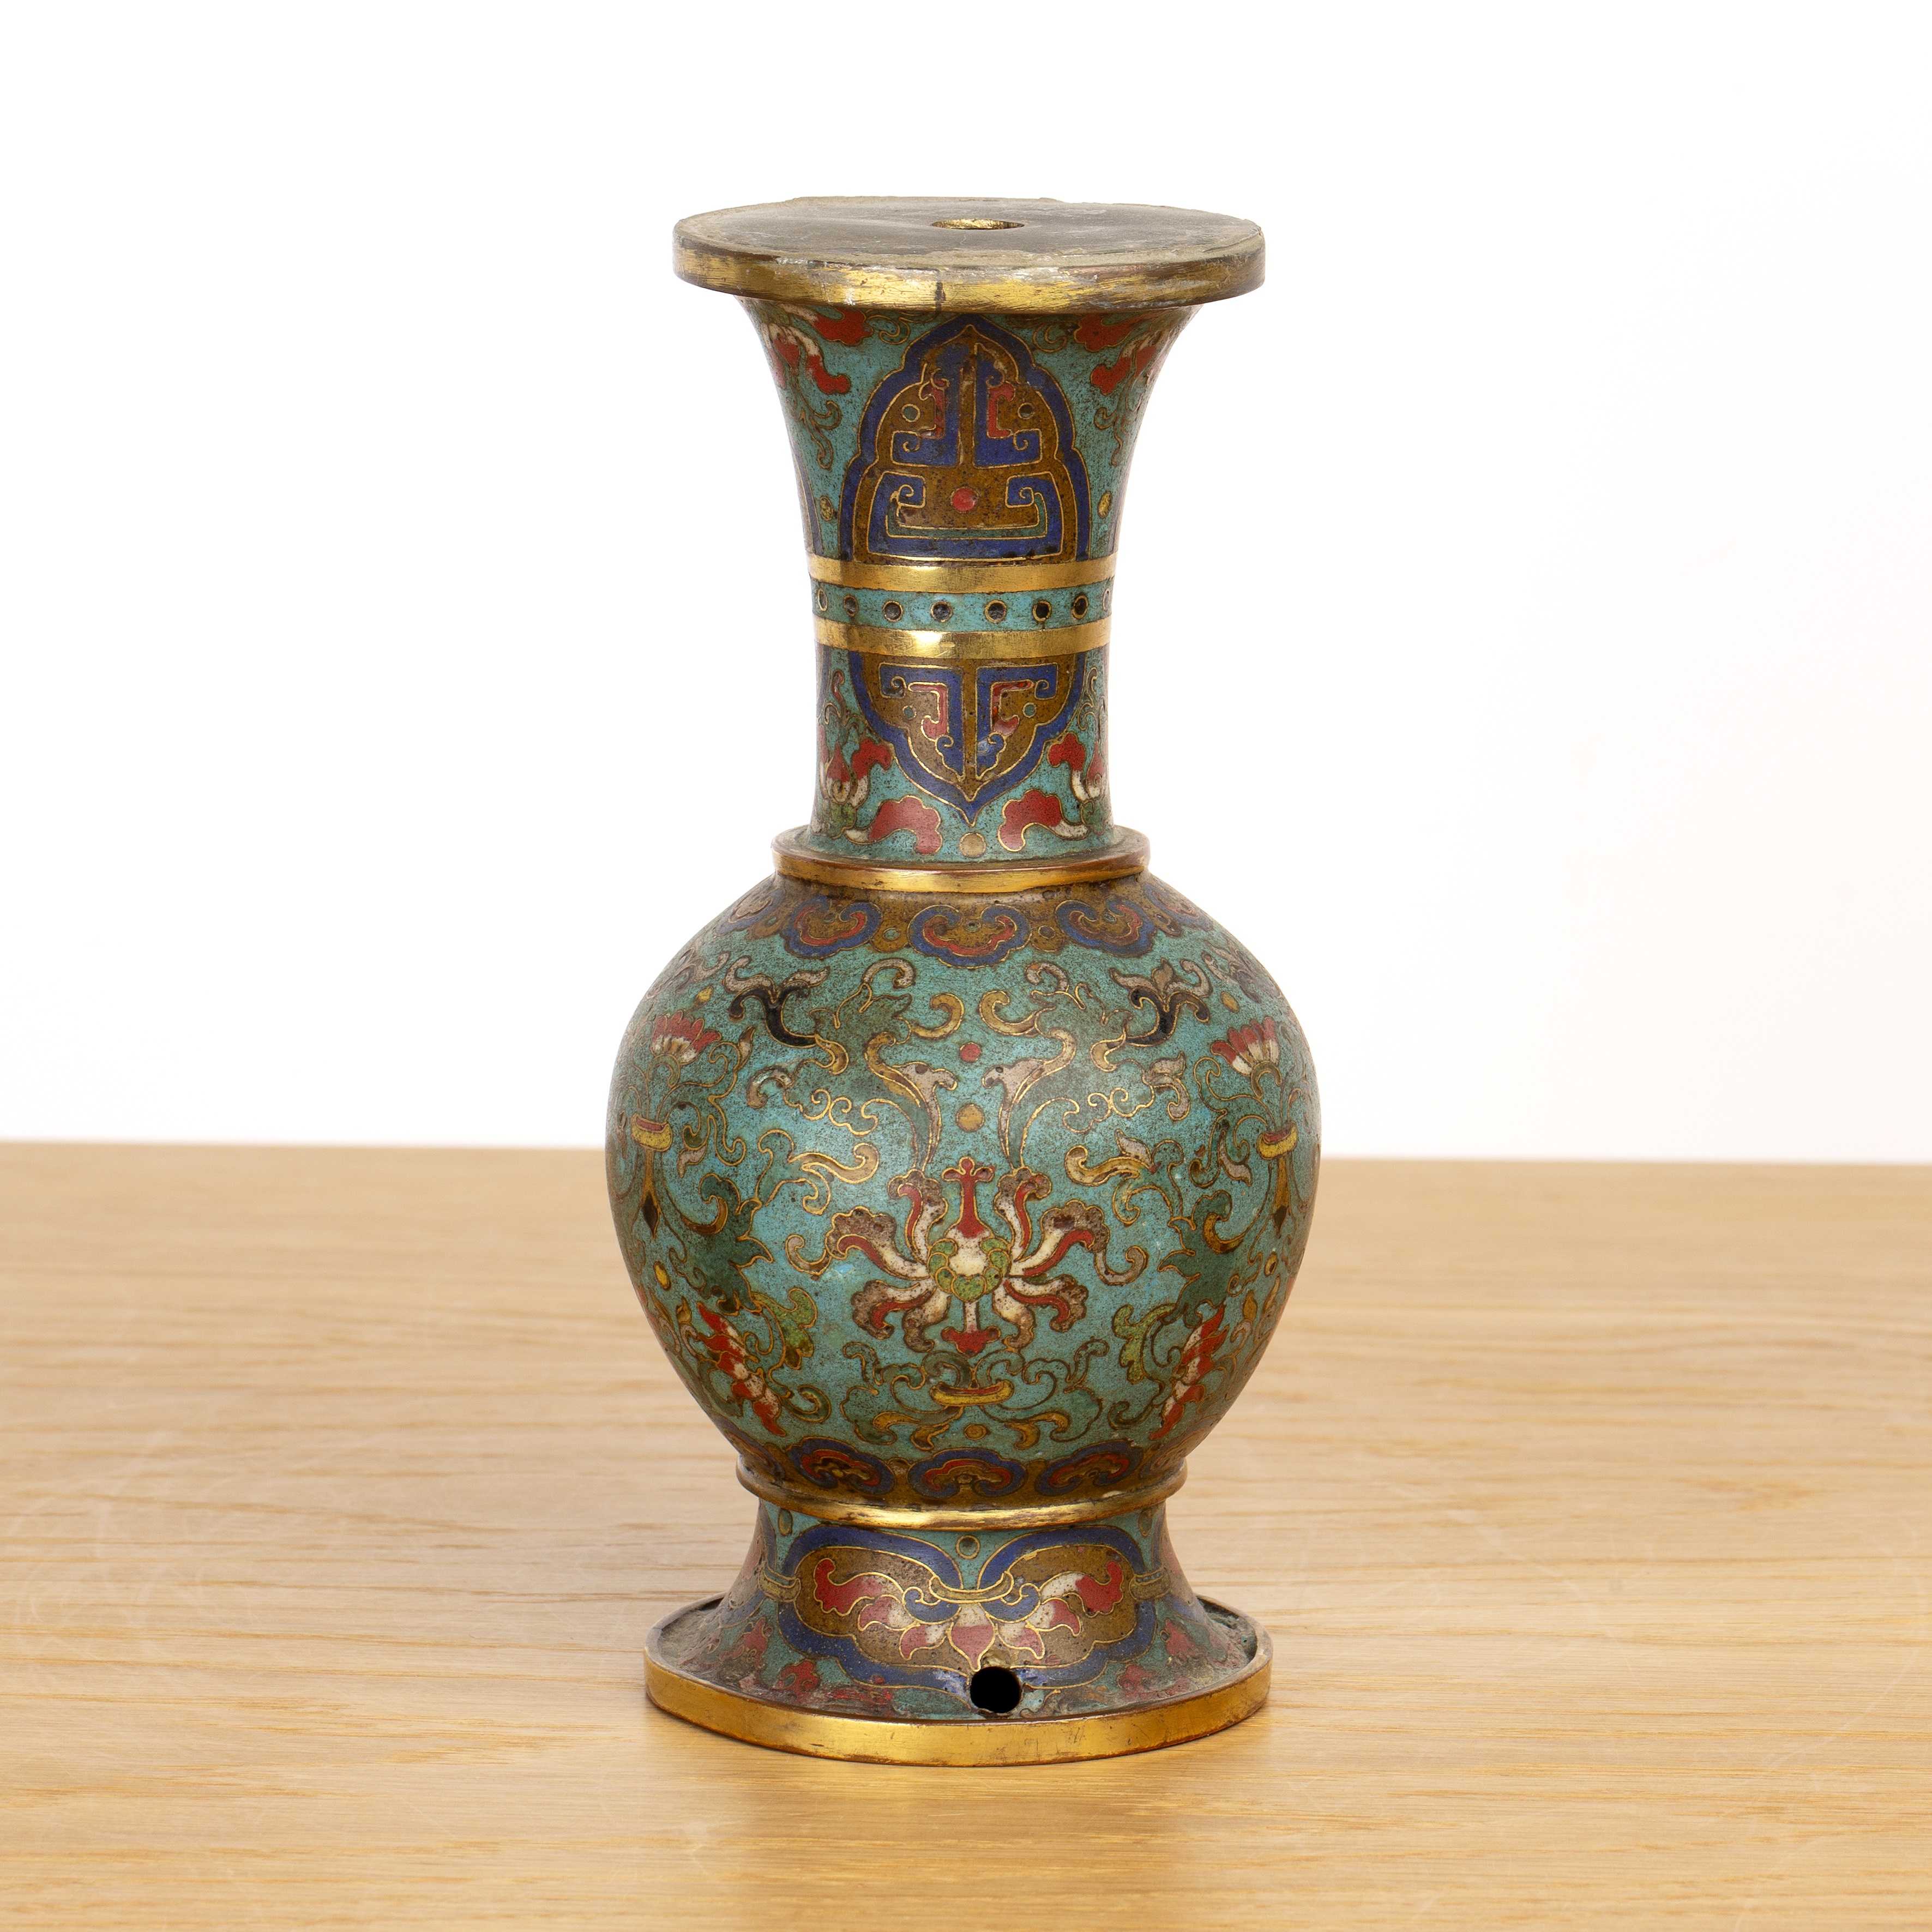 Cloisonne vase Chinese, Qianlong with taotie, lotus and ruyi decoration, 21.2cm high The vase has